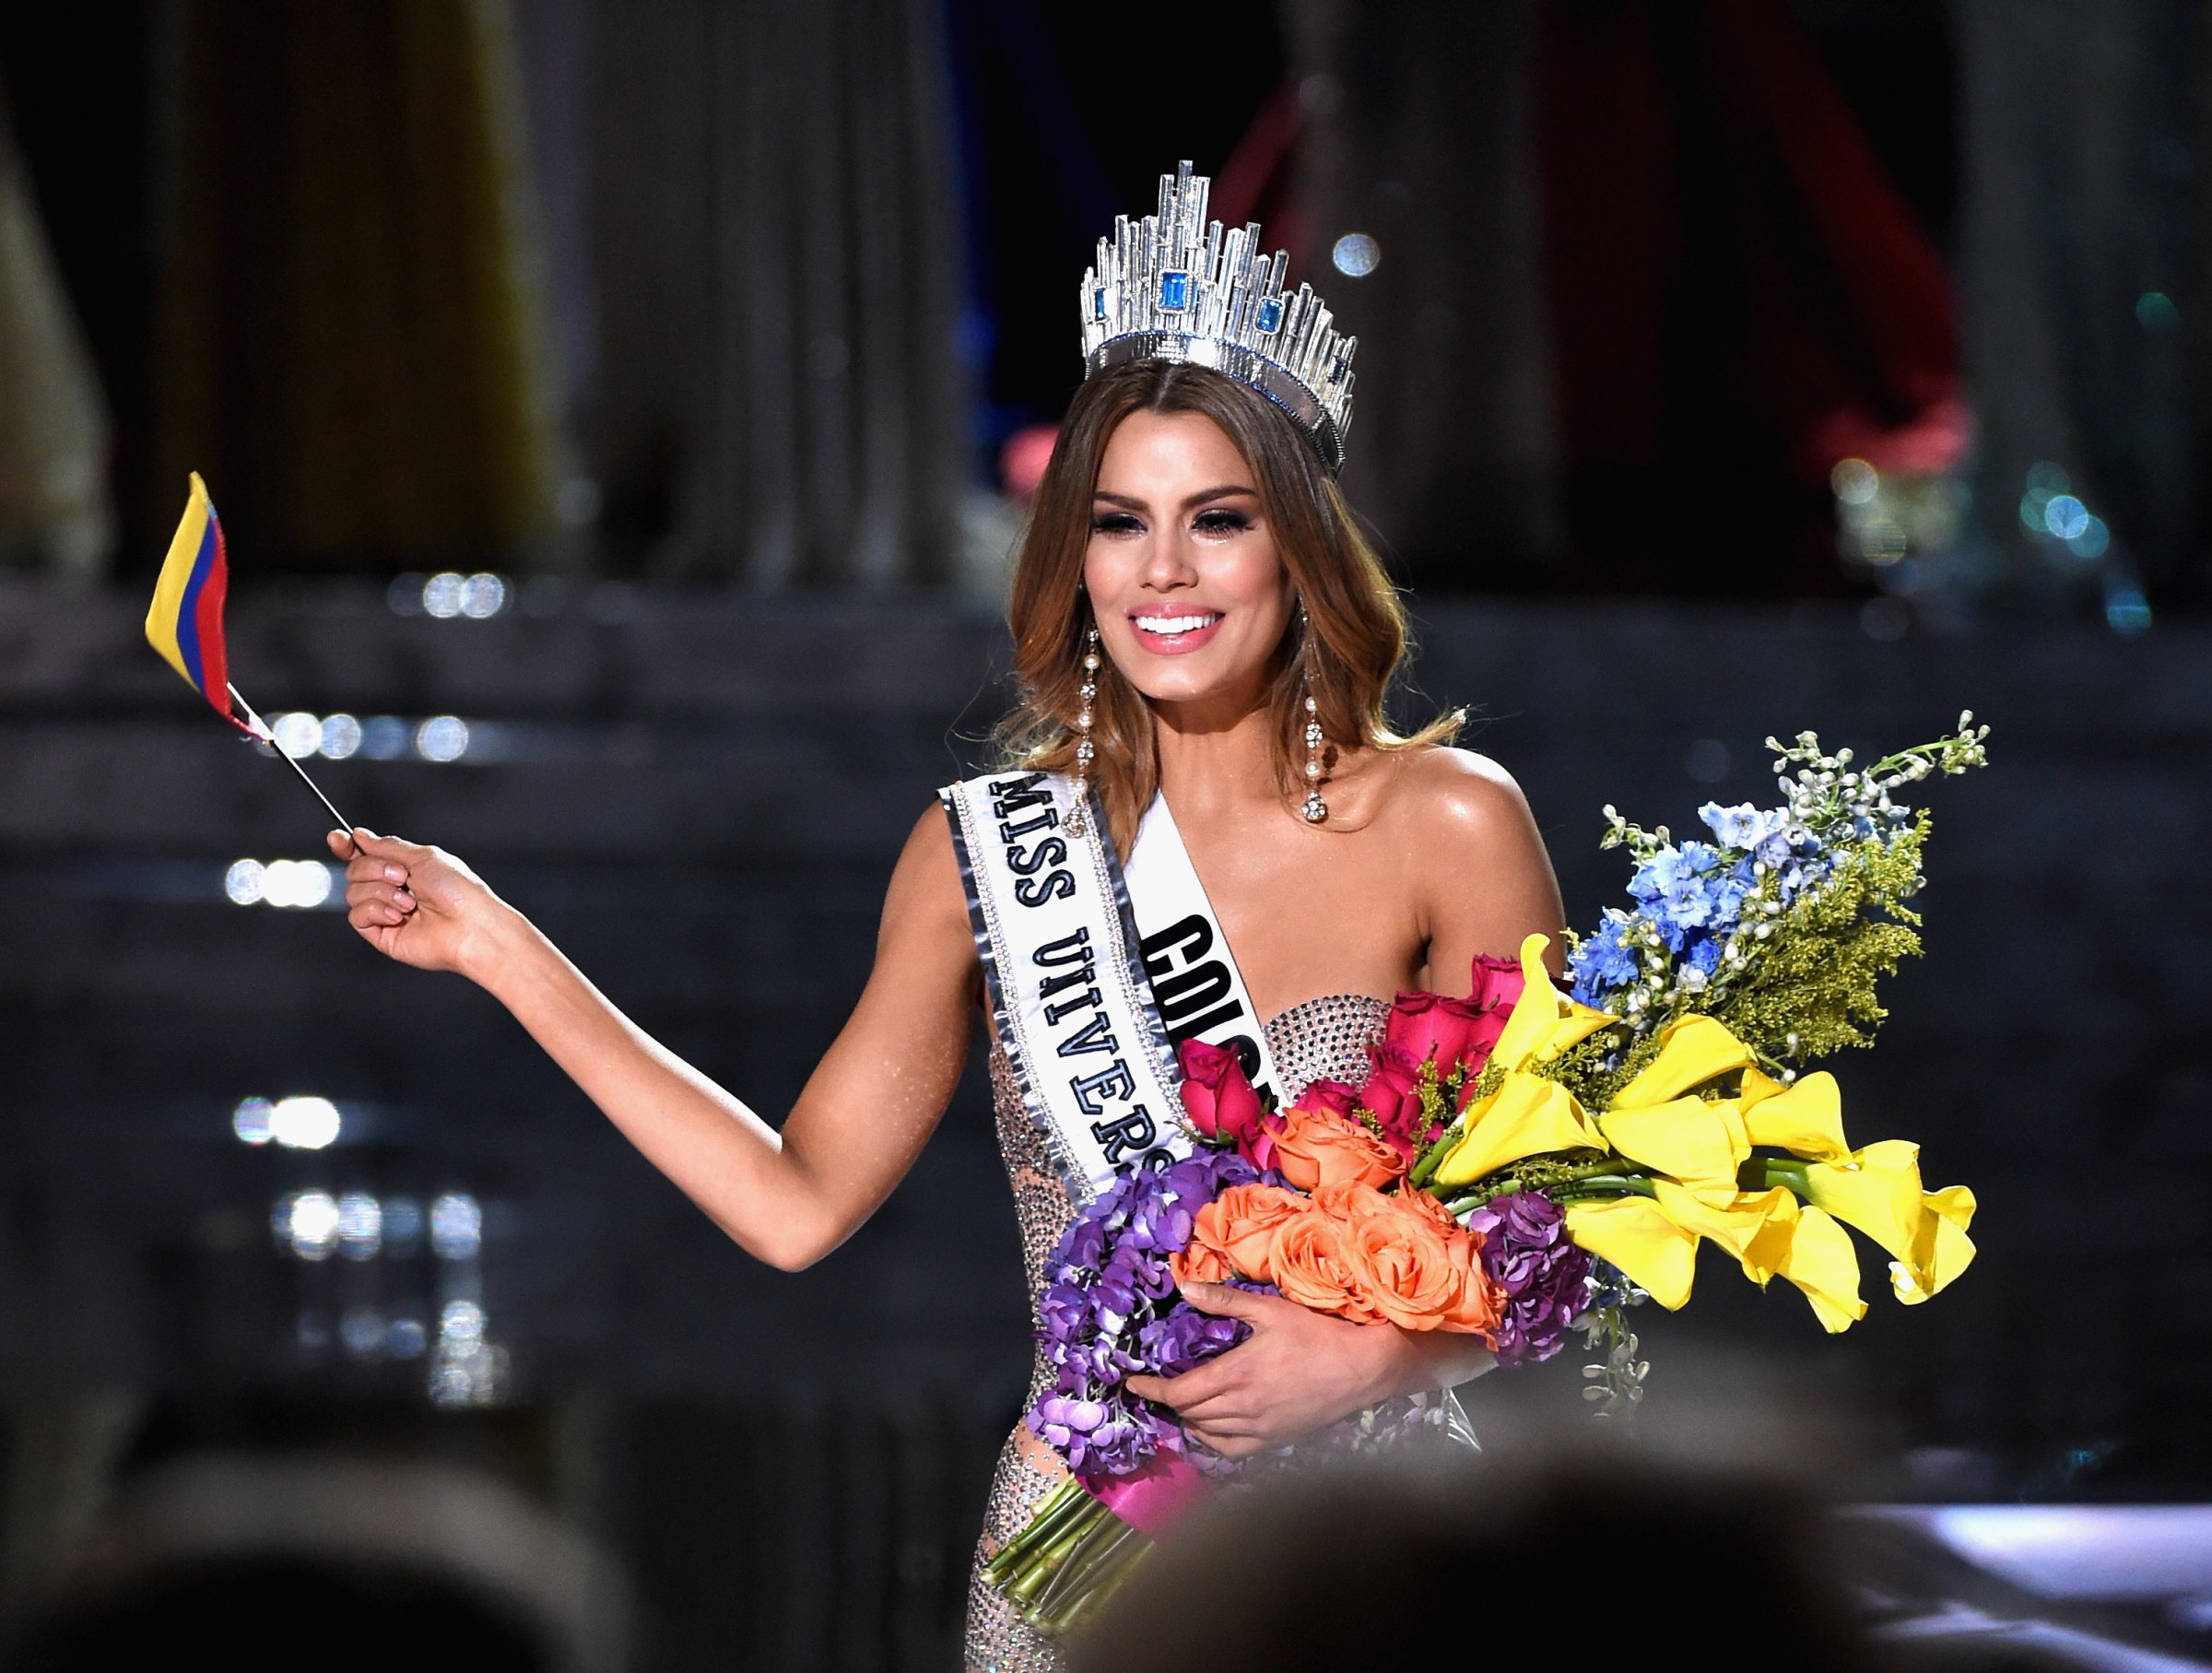 the 2015 Miss Universe Pageant at The Axis at Planet Hollywood Resort & Casino on December 20, 2015 in Las Vegas, Nevada.